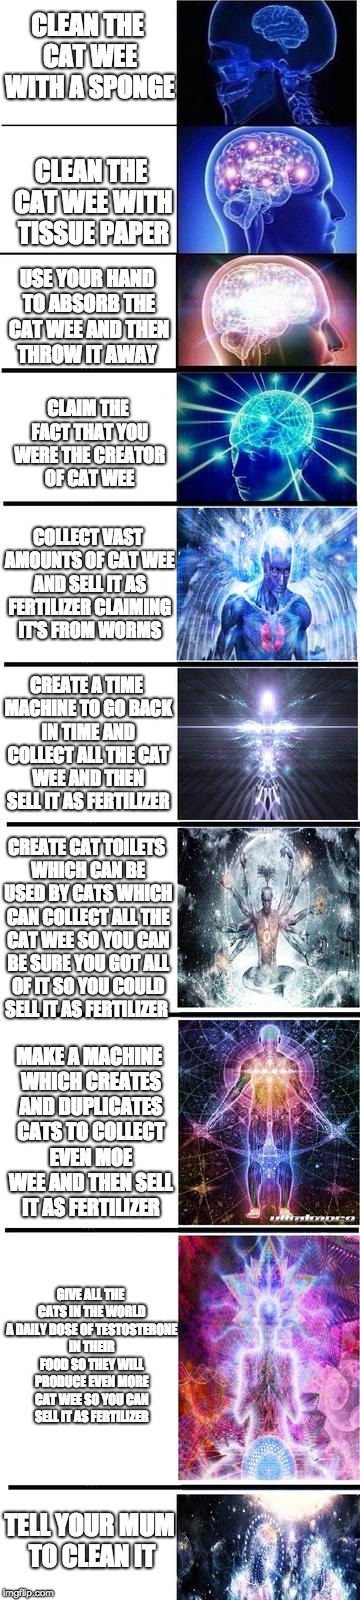 expanding brain | CLEAN THE CAT WEE WITH A SPONGE; CLEAN THE CAT WEE WITH TISSUE PAPER; USE YOUR HAND TO ABSORB THE CAT WEE AND THEN THROW IT AWAY; CLAIM THE FACT THAT YOU WERE THE CREATOR OF CAT WEE; COLLECT VAST AMOUNTS OF CAT WEE AND SELL IT AS FERTILIZER CLAIMING IT'S FROM WORMS; CREATE A TIME MACHINE TO GO BACK IN TIME AND COLLECT ALL THE CAT WEE AND THEN SELL IT AS FERTILIZER; CREATE CAT TOILETS WHICH CAN BE USED BY CATS WHICH CAN COLLECT ALL THE CAT WEE SO YOU CAN BE SURE YOU GOT ALL OF IT SO YOU COULD SELL IT AS FERTILIZER; MAKE A MACHINE WHICH CREATES AND DUPLICATES CATS TO COLLECT EVEN MOE WEE AND THEN SELL IT AS FERTILIZER; GIVE ALL THE CATS IN THE WORLD A DAILY DOSE OF TESTOSTERONE IN THEIR FOOD SO THEY WILL PRODUCE EVEN MORE CAT WEE SO YOU CAN SELL IT AS FERTILIZER; TELL YOUR MUM TO CLEAN IT | image tagged in expanding brain | made w/ Imgflip meme maker